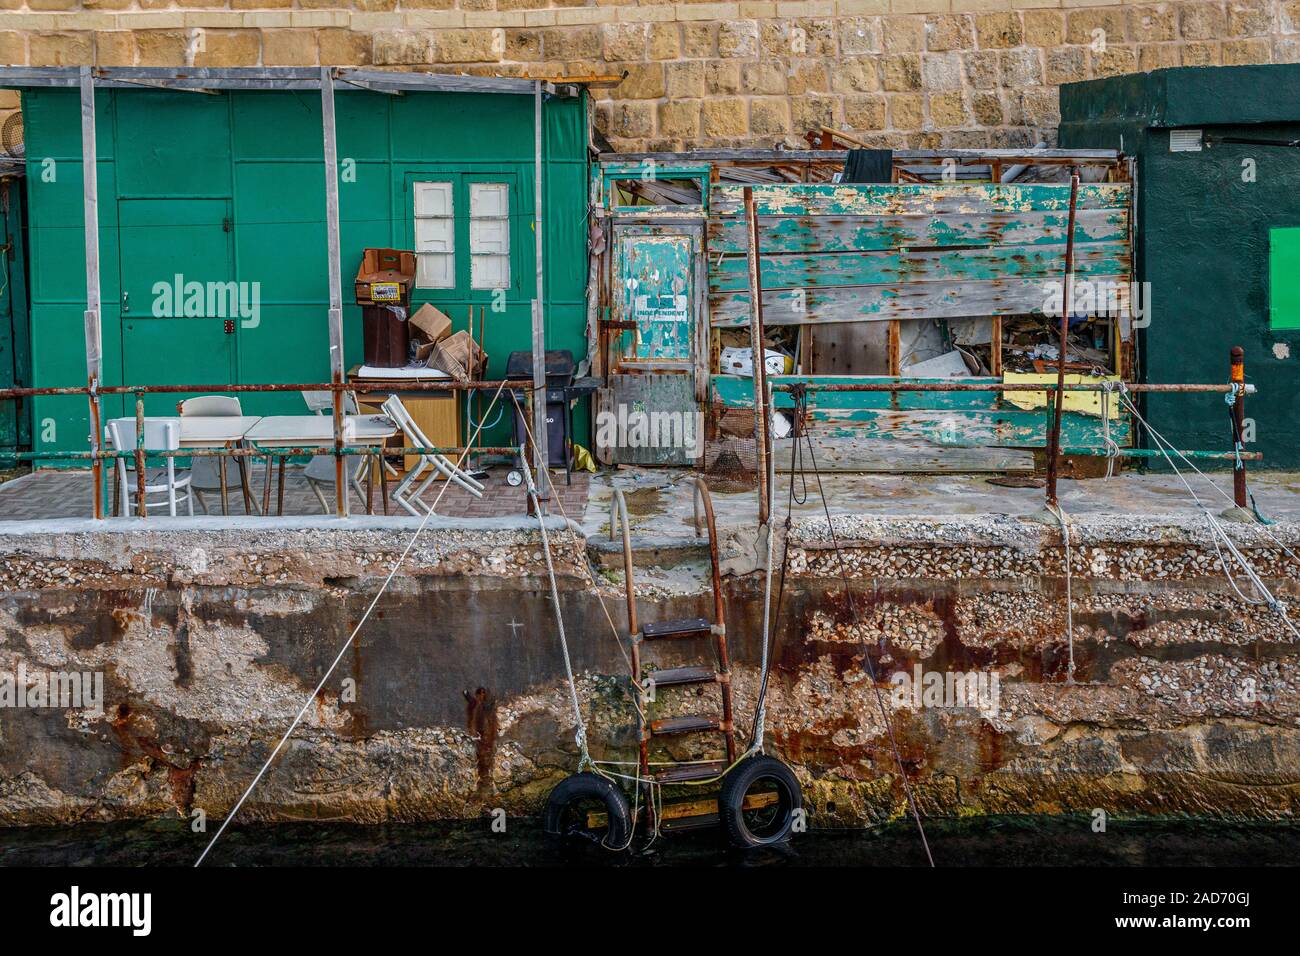 Fisherman's dockside facilities at Valletta, Malta. Assorted sheds and homemade storage units. Stock Photo